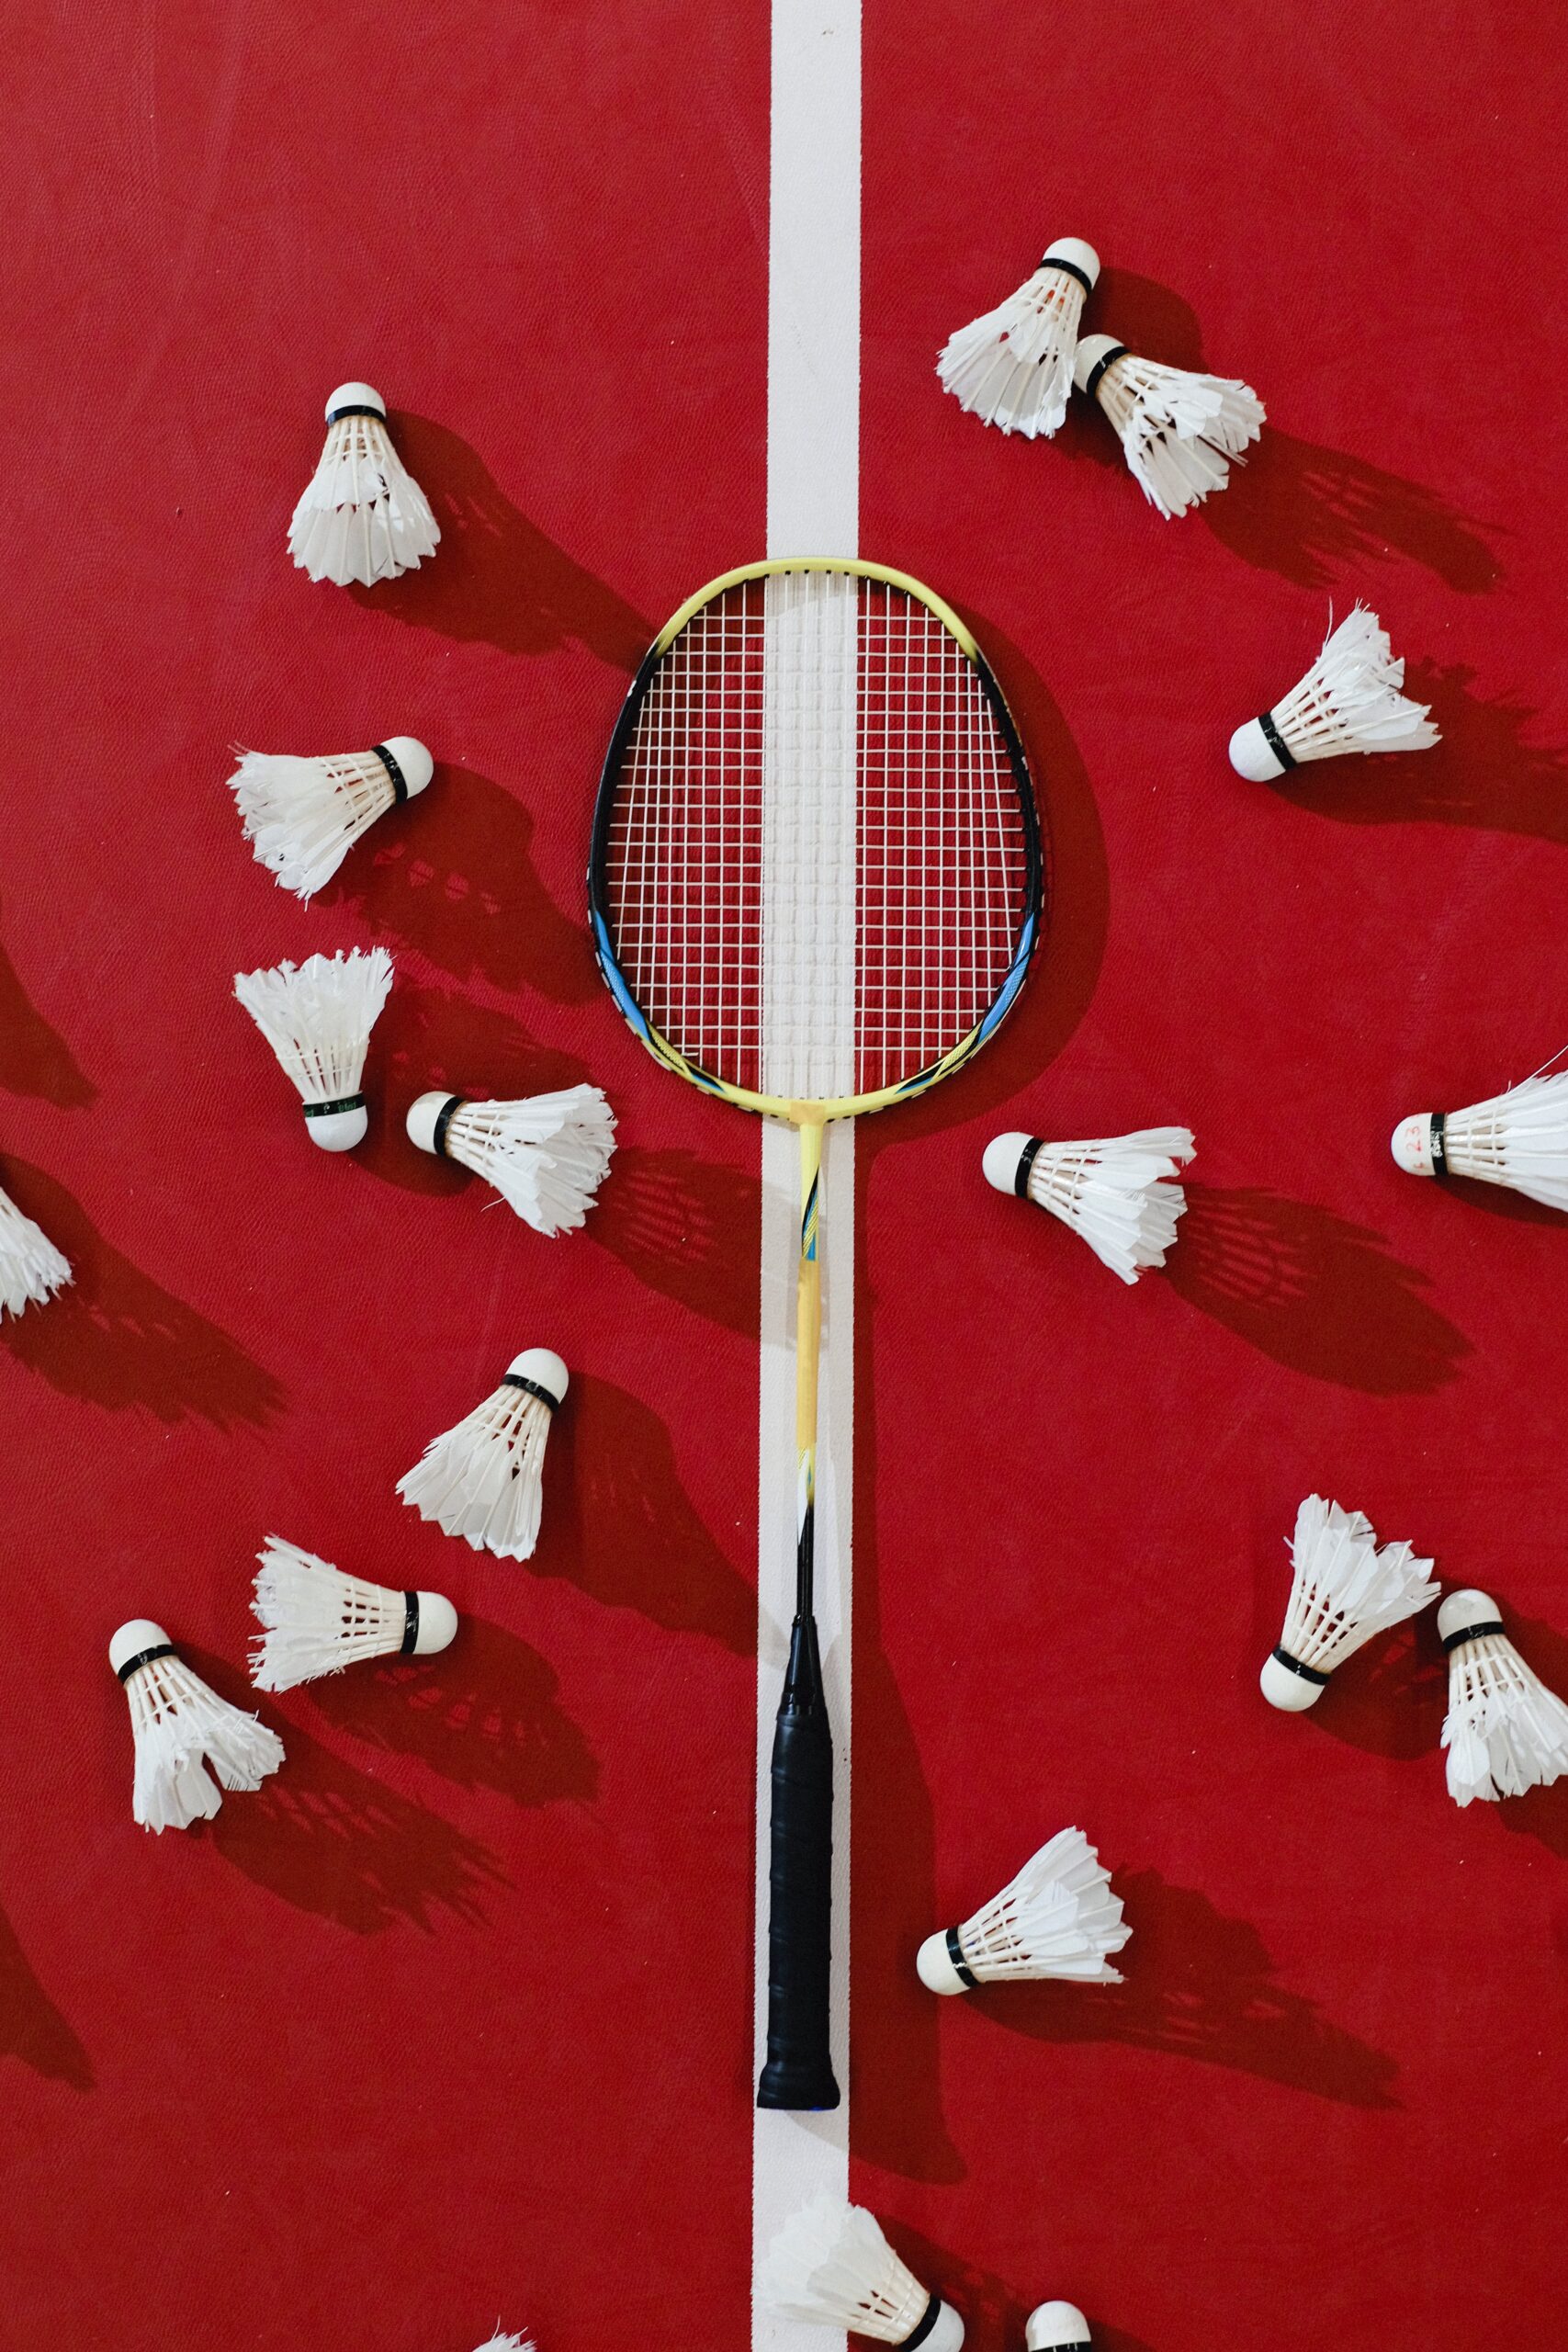 Net Mastery: Unveiling the Best in Badminton – Review